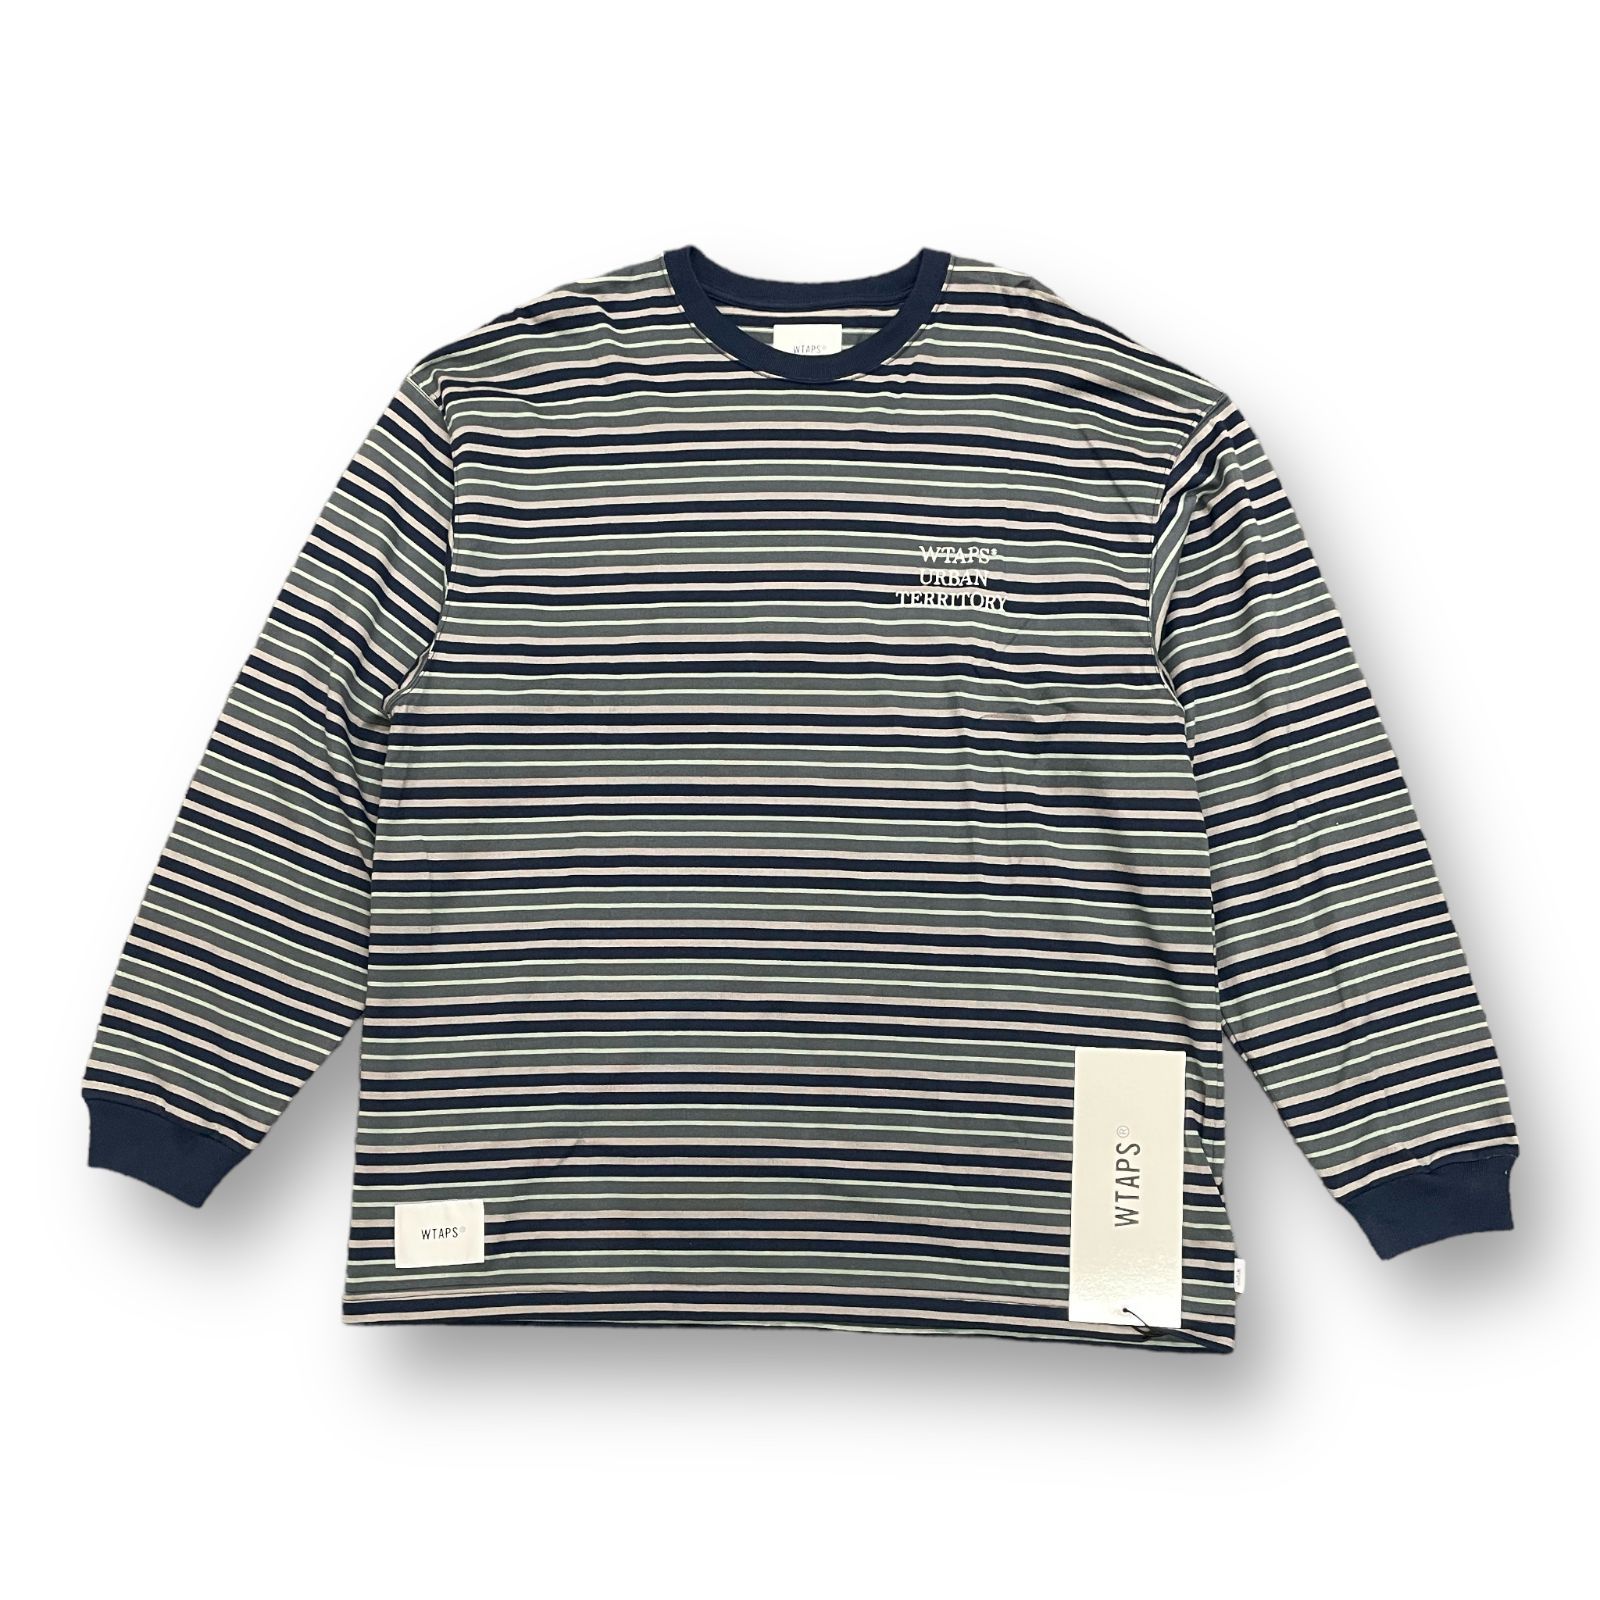 WTAPS BDY 01 / LS / 23SS | camillevieraservices.com